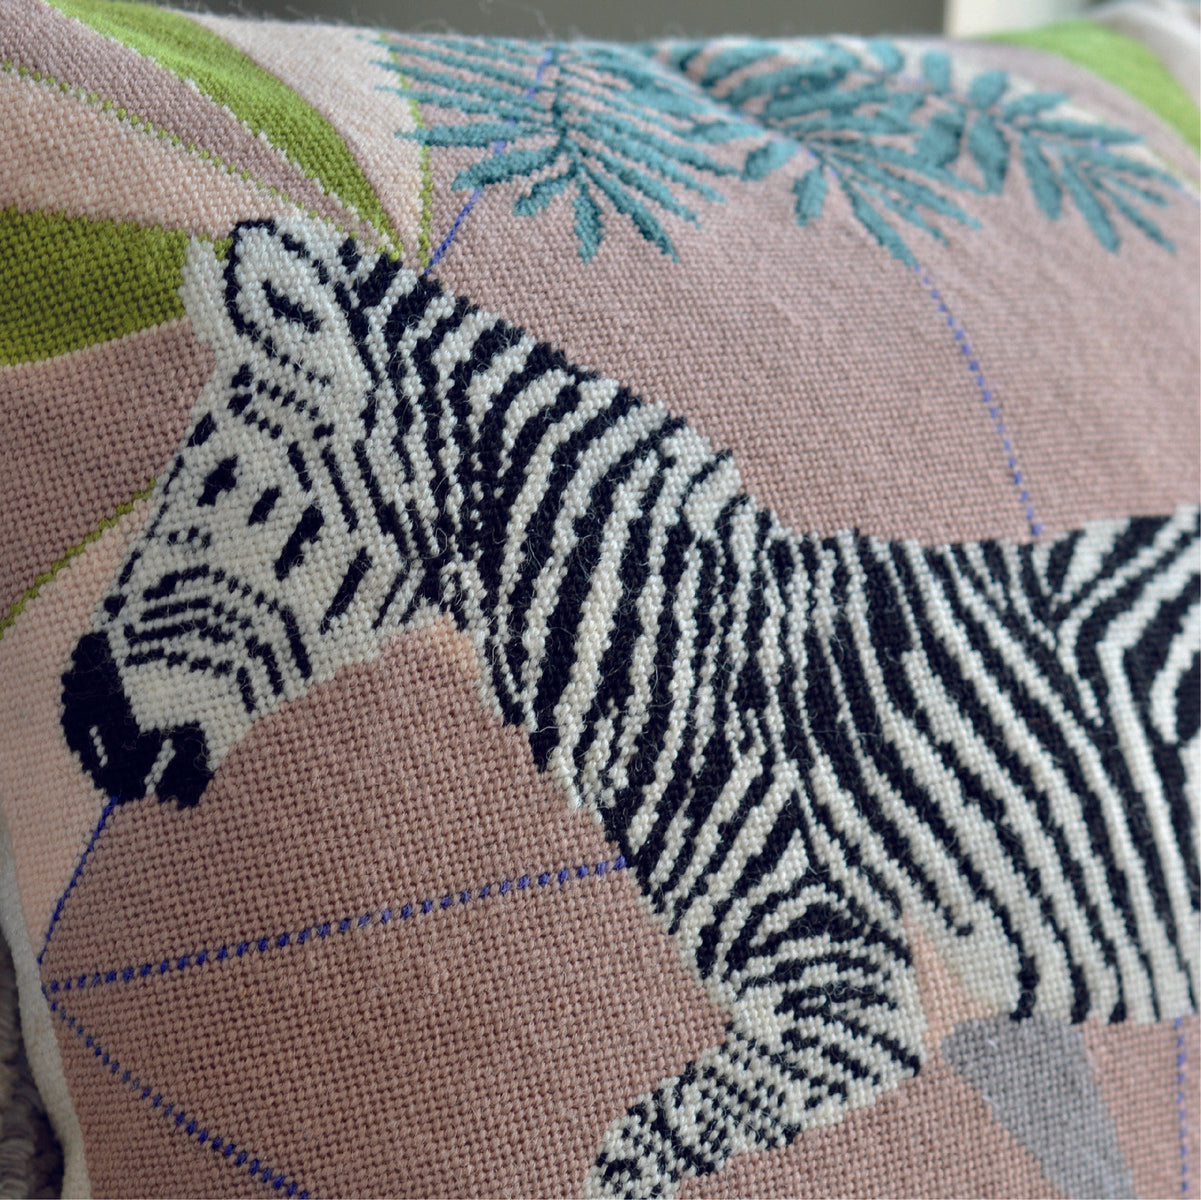 Close-up stitching detail of a zebra needlepoint kit, revealing the intricate pattern and meticulous craftsmanship, showcasing the beauty and texture of the finished tapestry cushion.